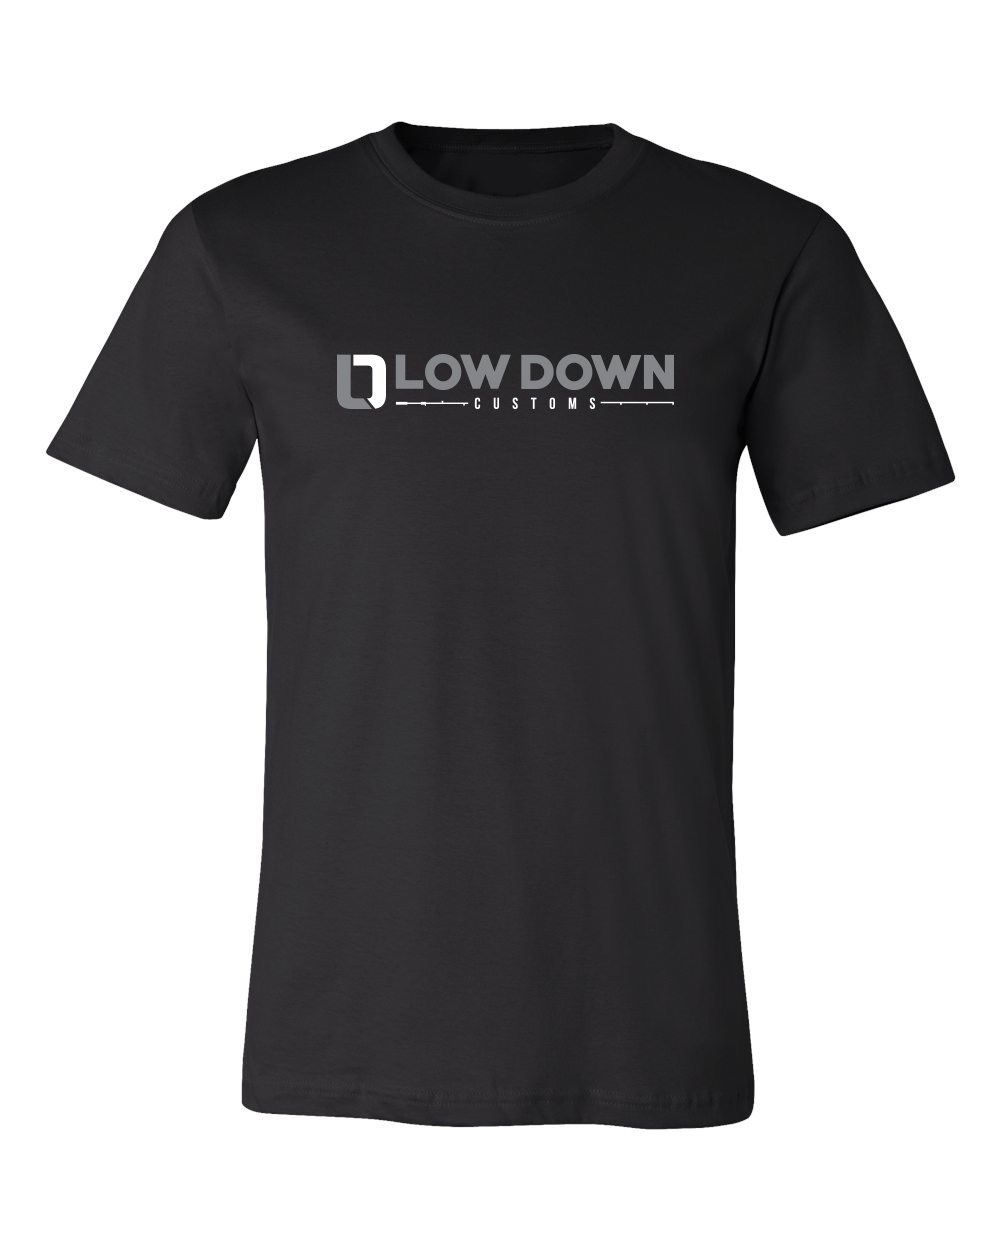 LOW DOWN CUSTOMS】Low Down Custom Rods Shirt In Black - STRUCTURE